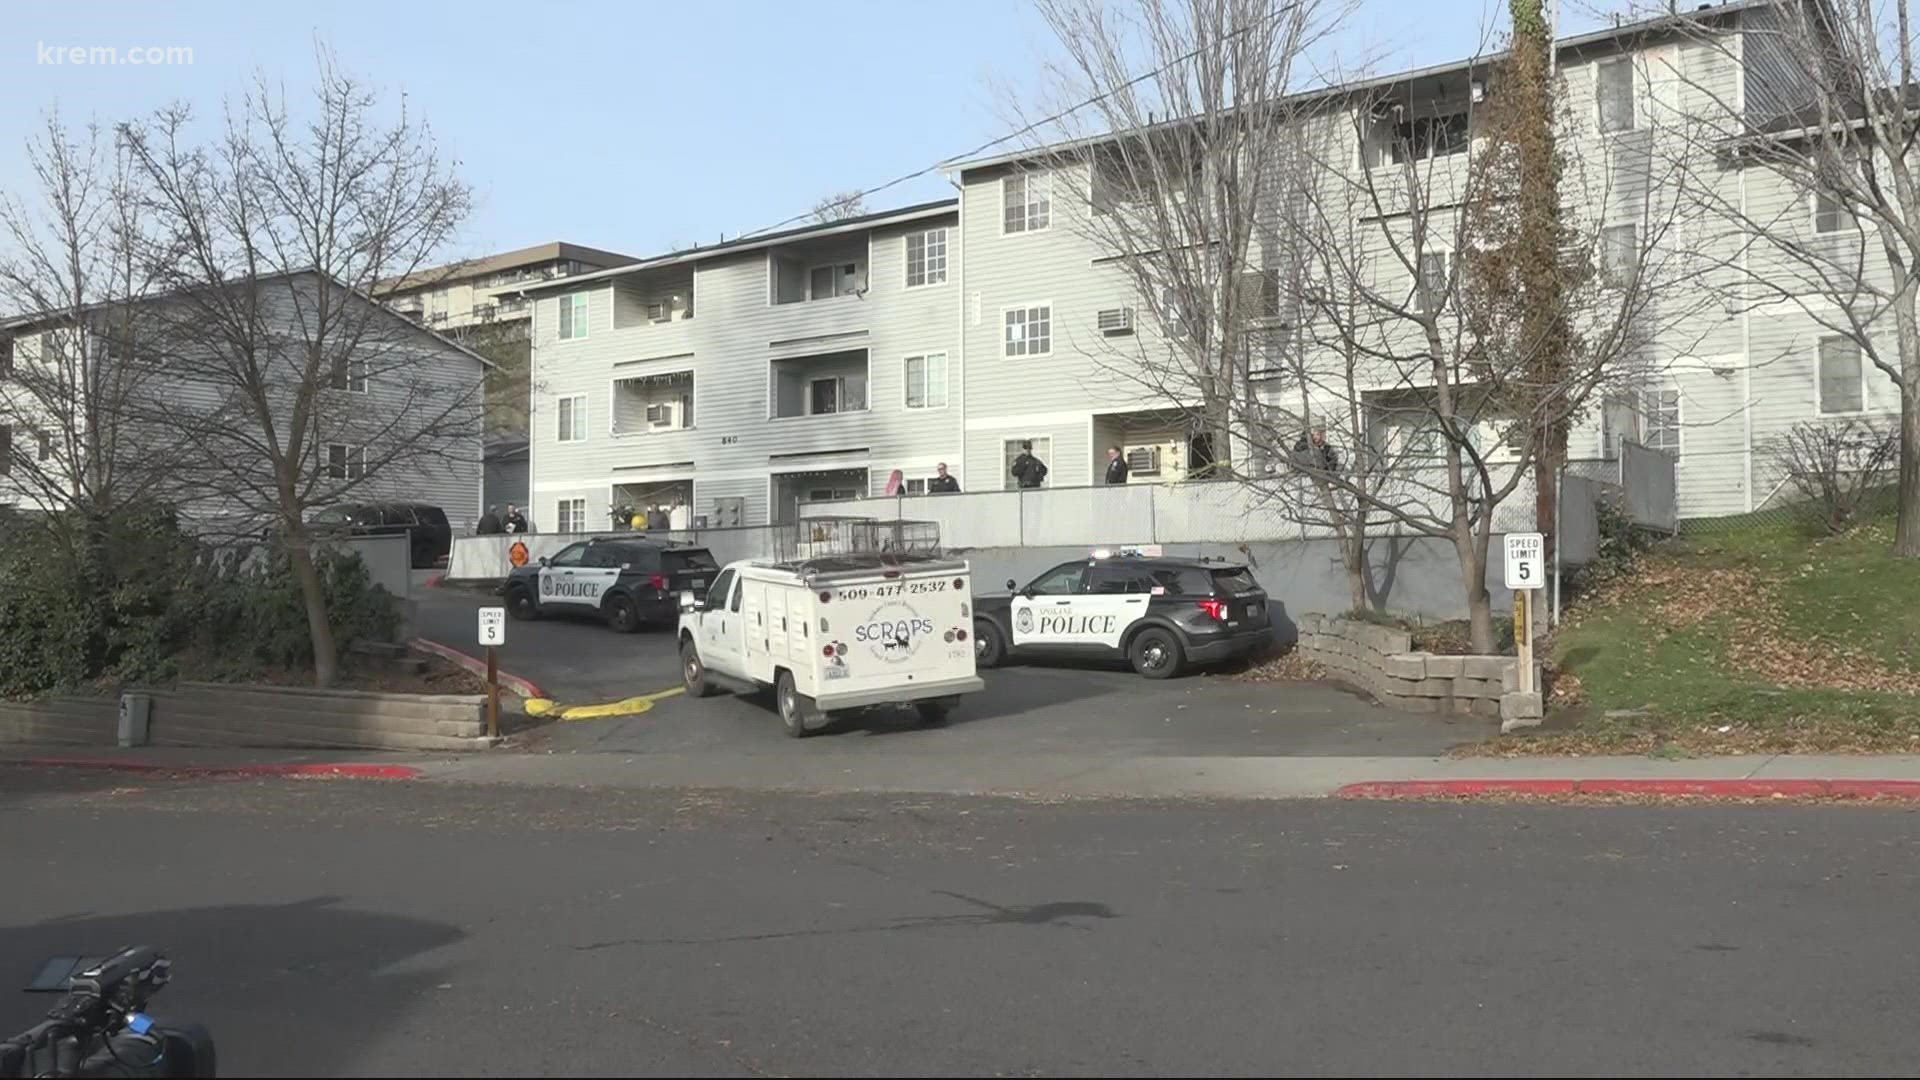 The shooting took place around 10:45 a.m. at the Northcliff Terrace Apartments in Spokane's Garland District.